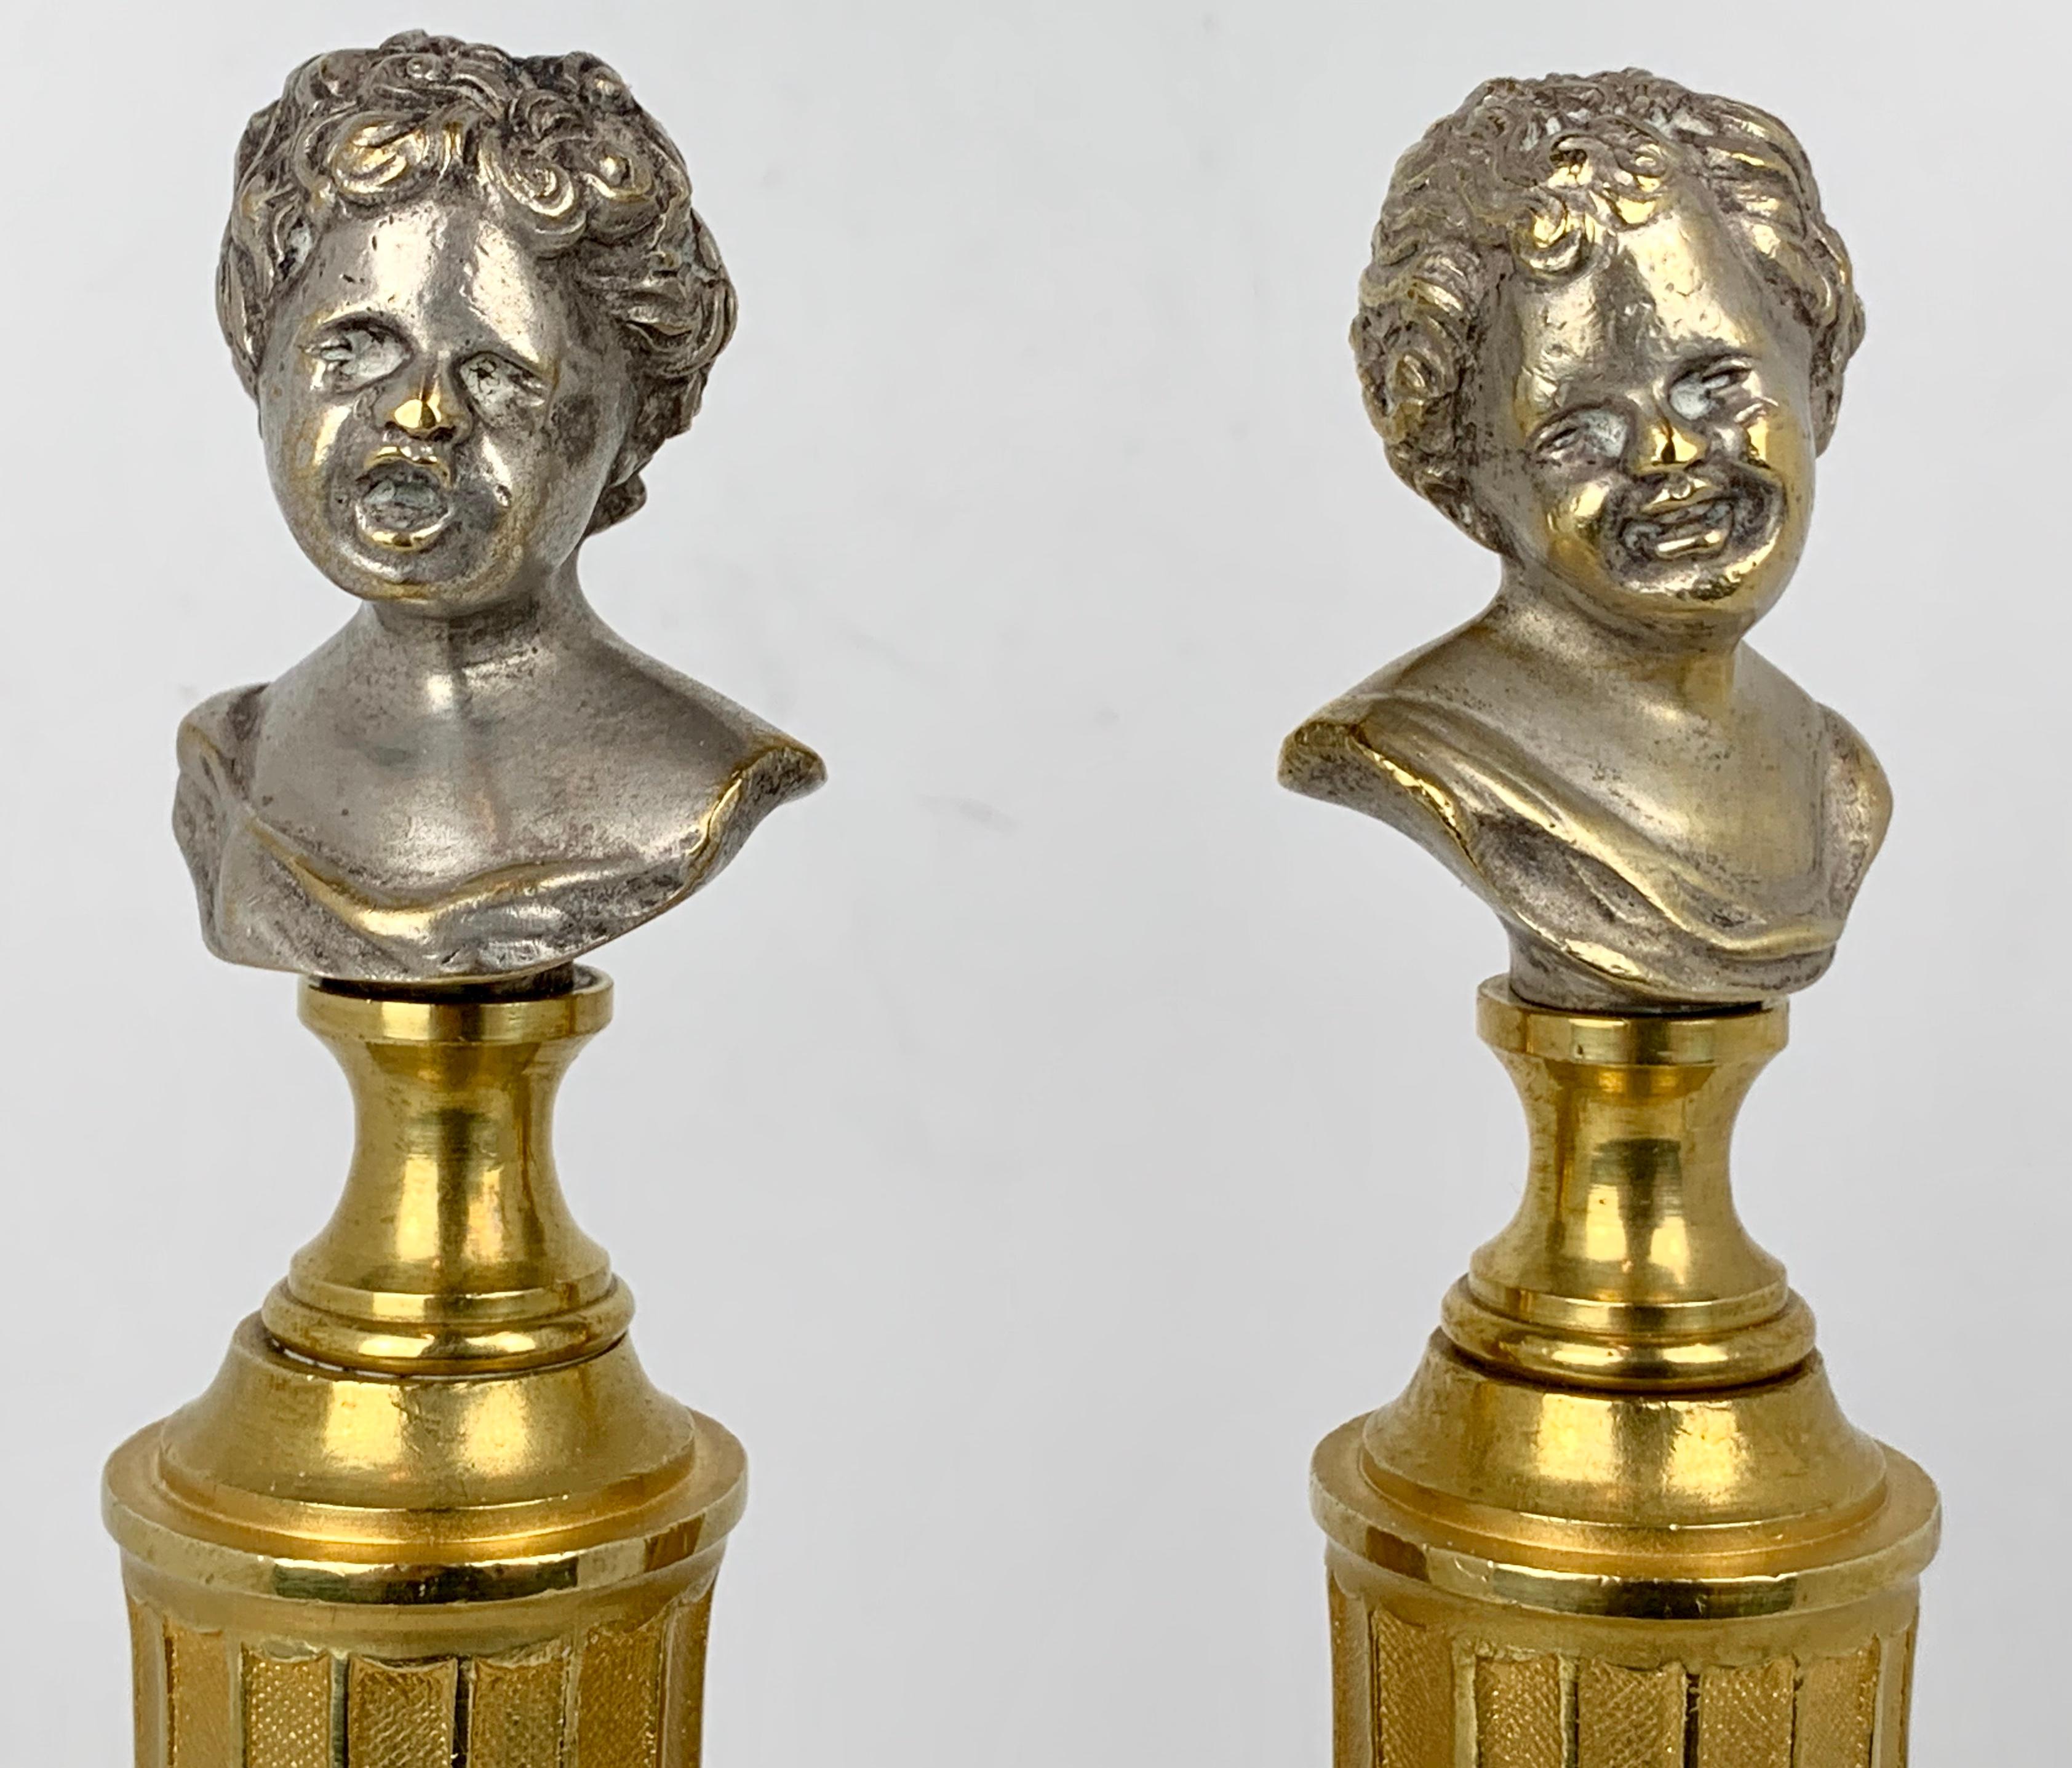 Pair of parcel-gilt bronze heads of crying babies on fluted bronze doré columns after Jean-Antoine Houdon. They have been placed on custom beveled Lucite columns which are removable.
Height-9.5